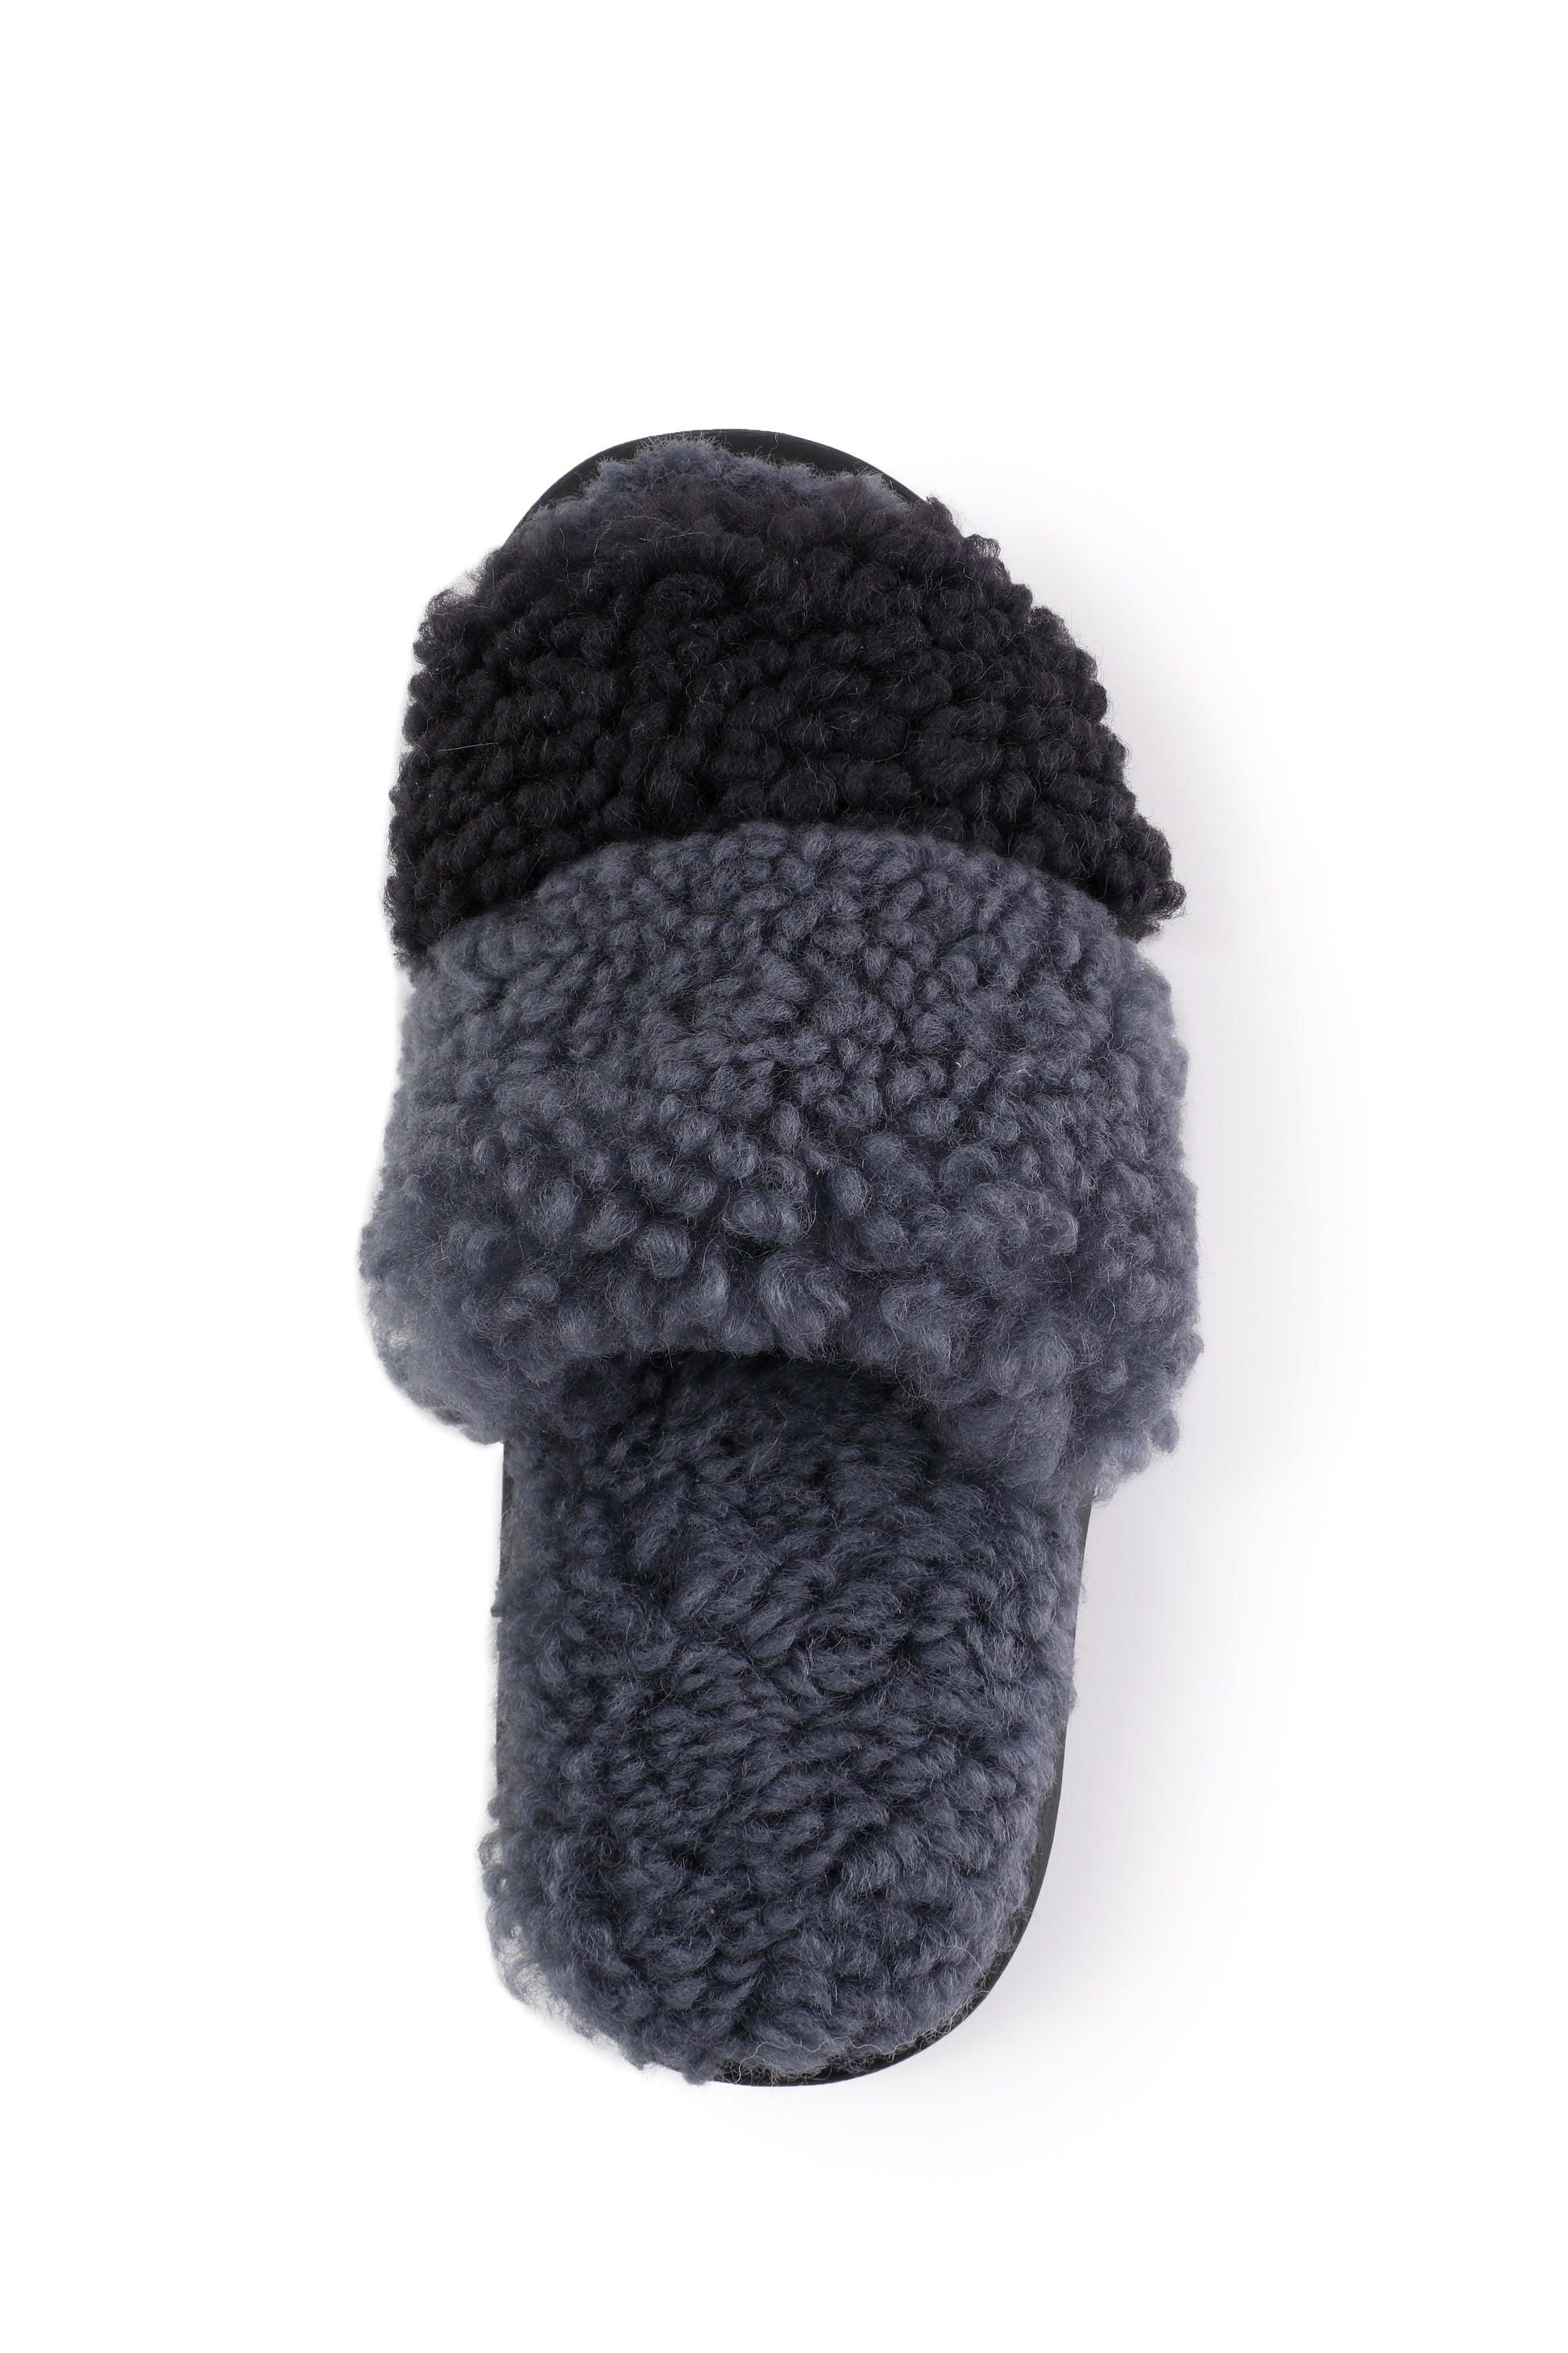 Soft Sheepskin Slippers with Grey Fur Lining in Black & Grey Color